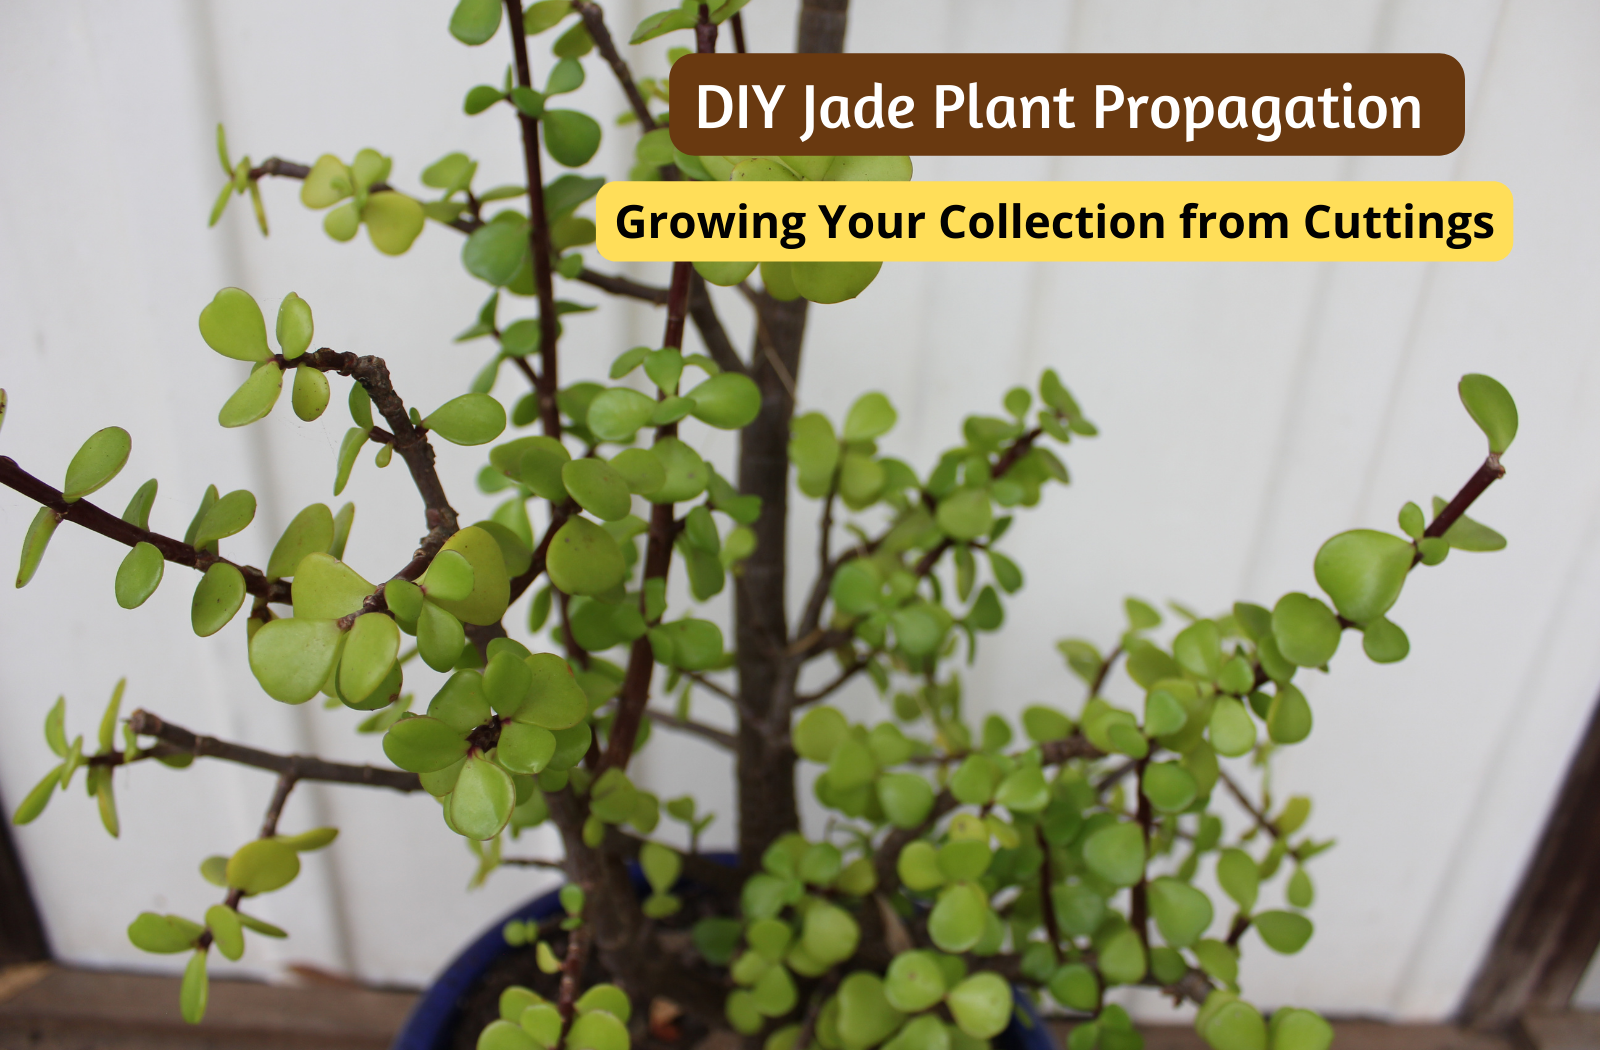 DIY Jade Plant Propagation: Growing Your Collection from Cuttings